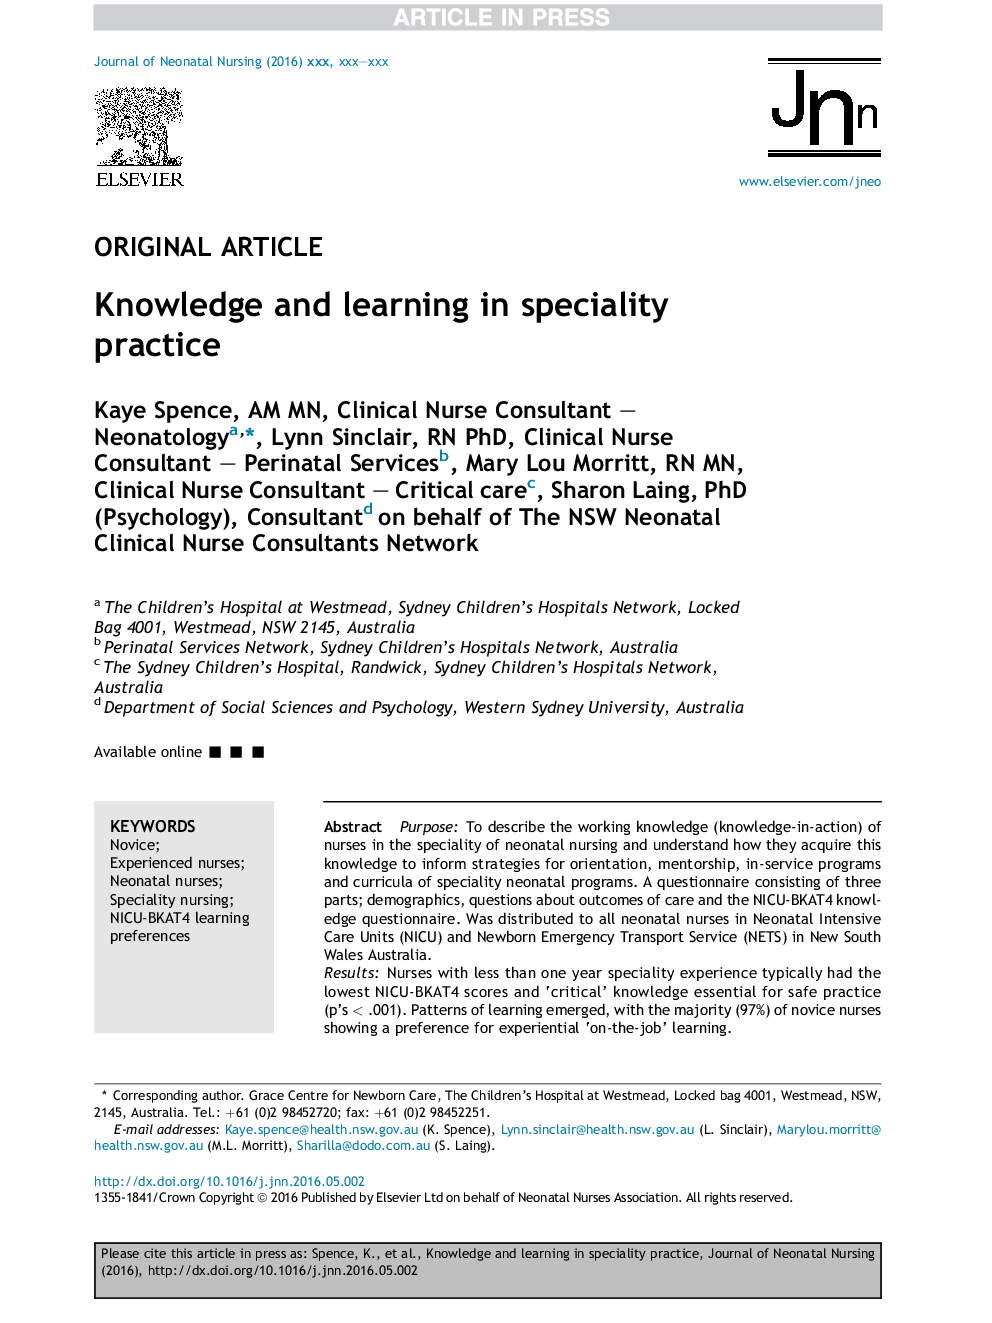 Knowledge and learning in speciality practice